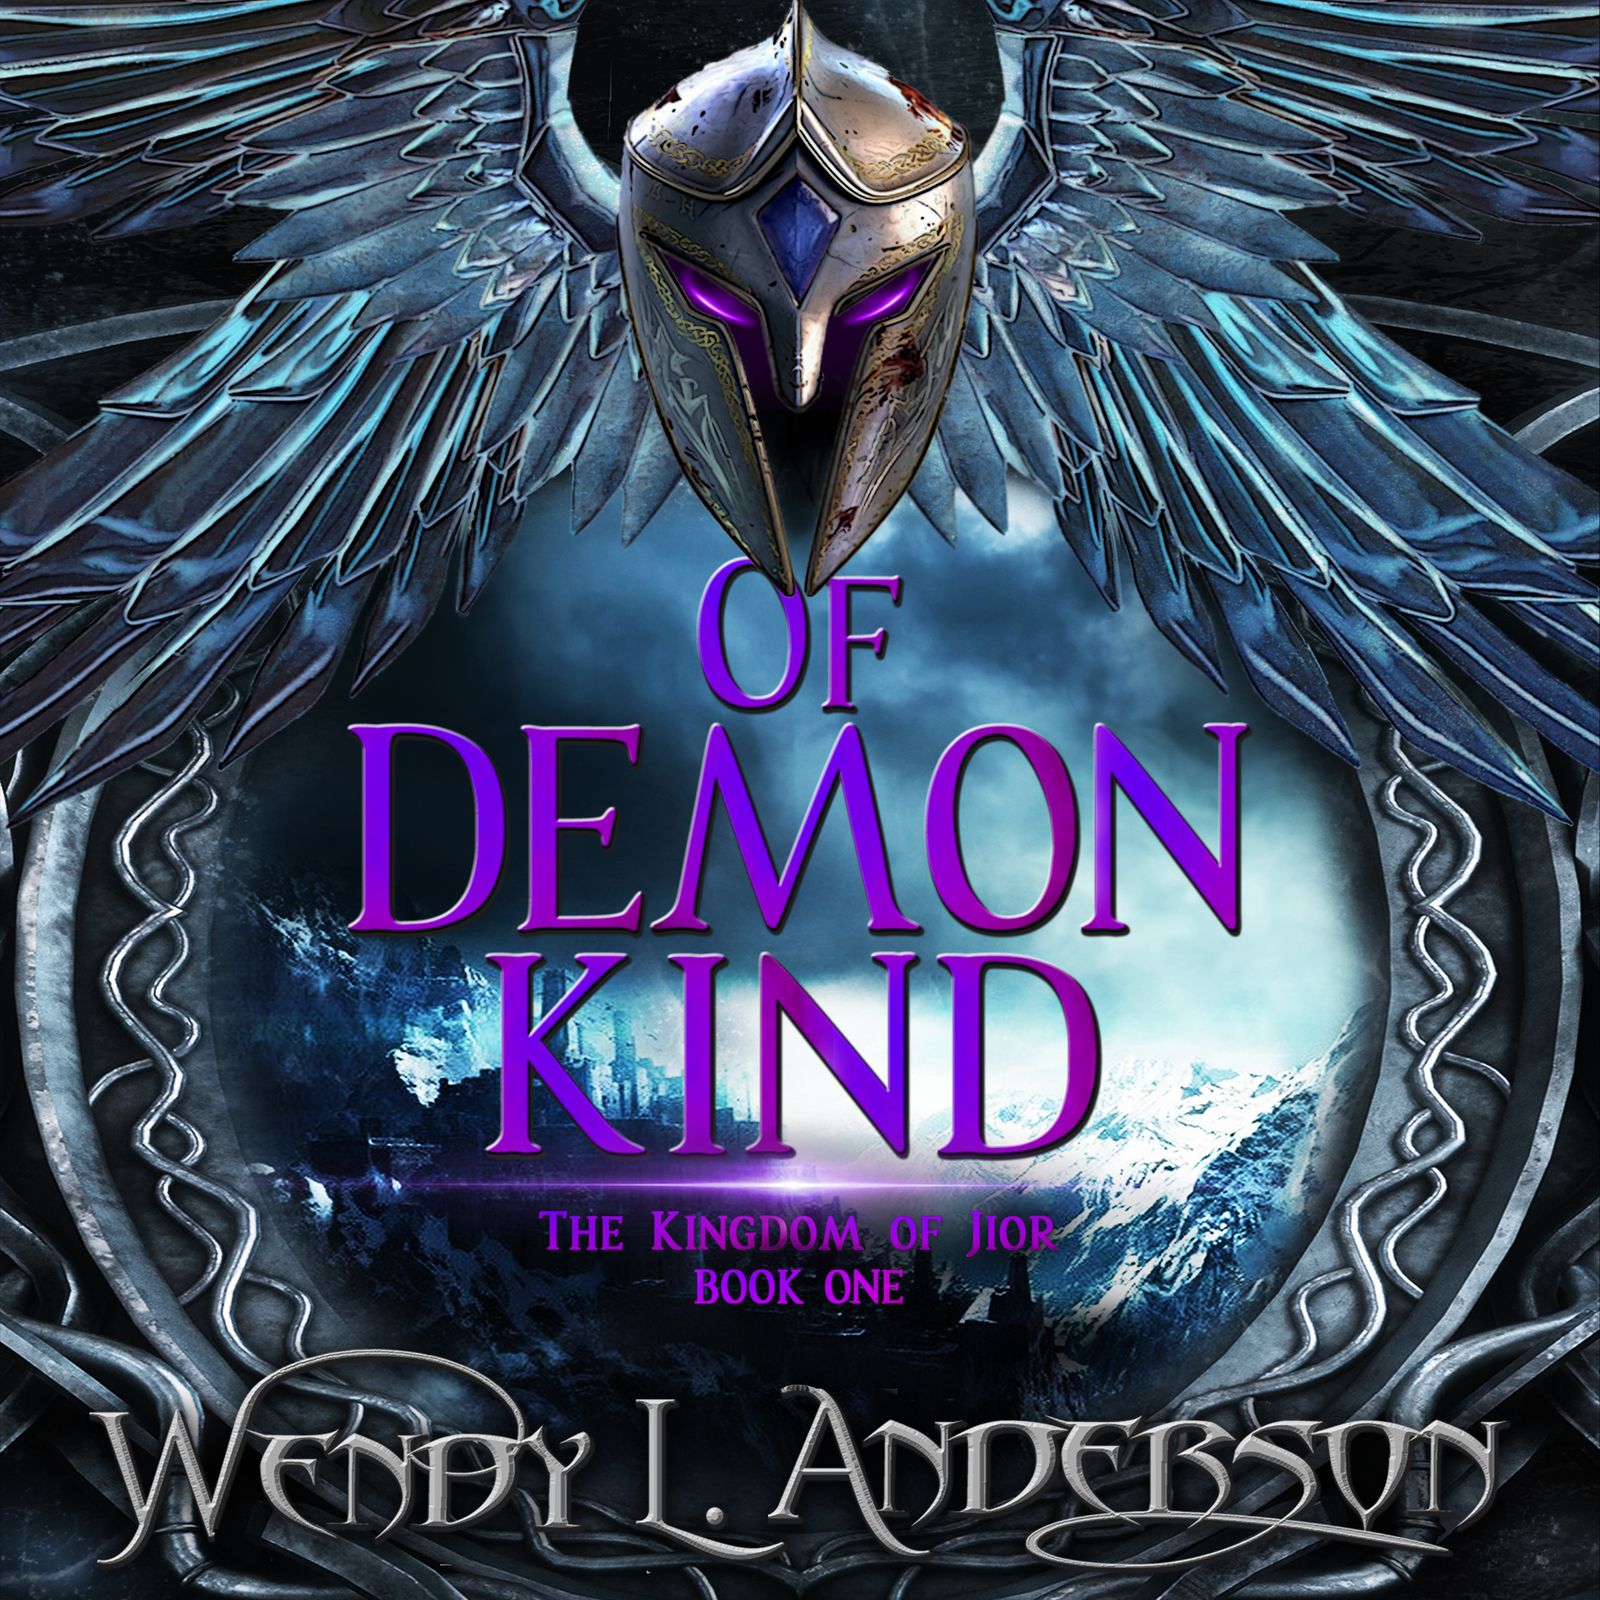 Interview With Wendy Anderson - Author of "Of Demon Kind"